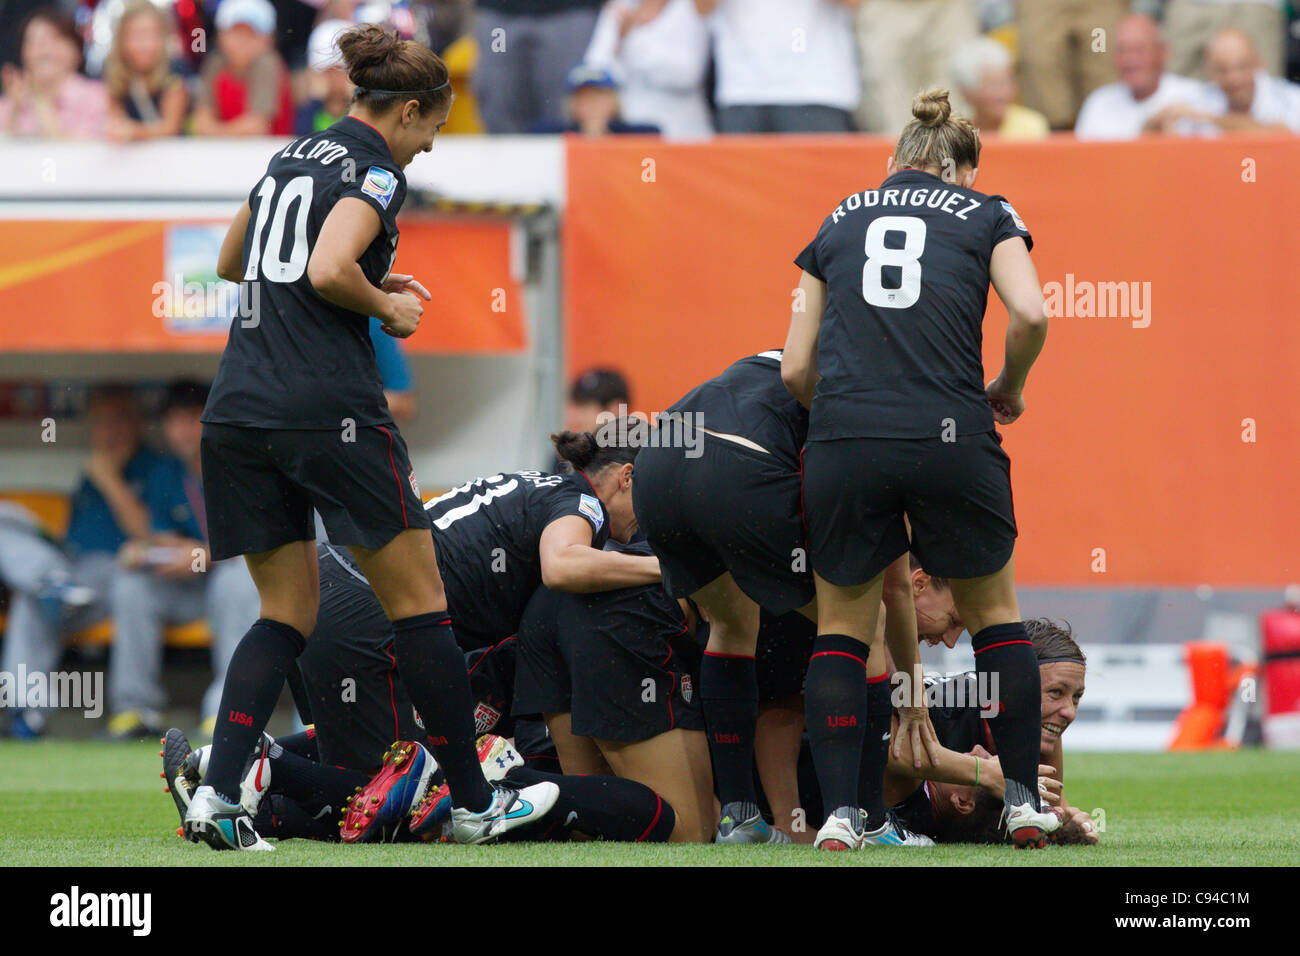 United States players celebrate after a goal against Brazil during a 2011 FIFA Women's World Cup quarterfinal match. Stock Photo